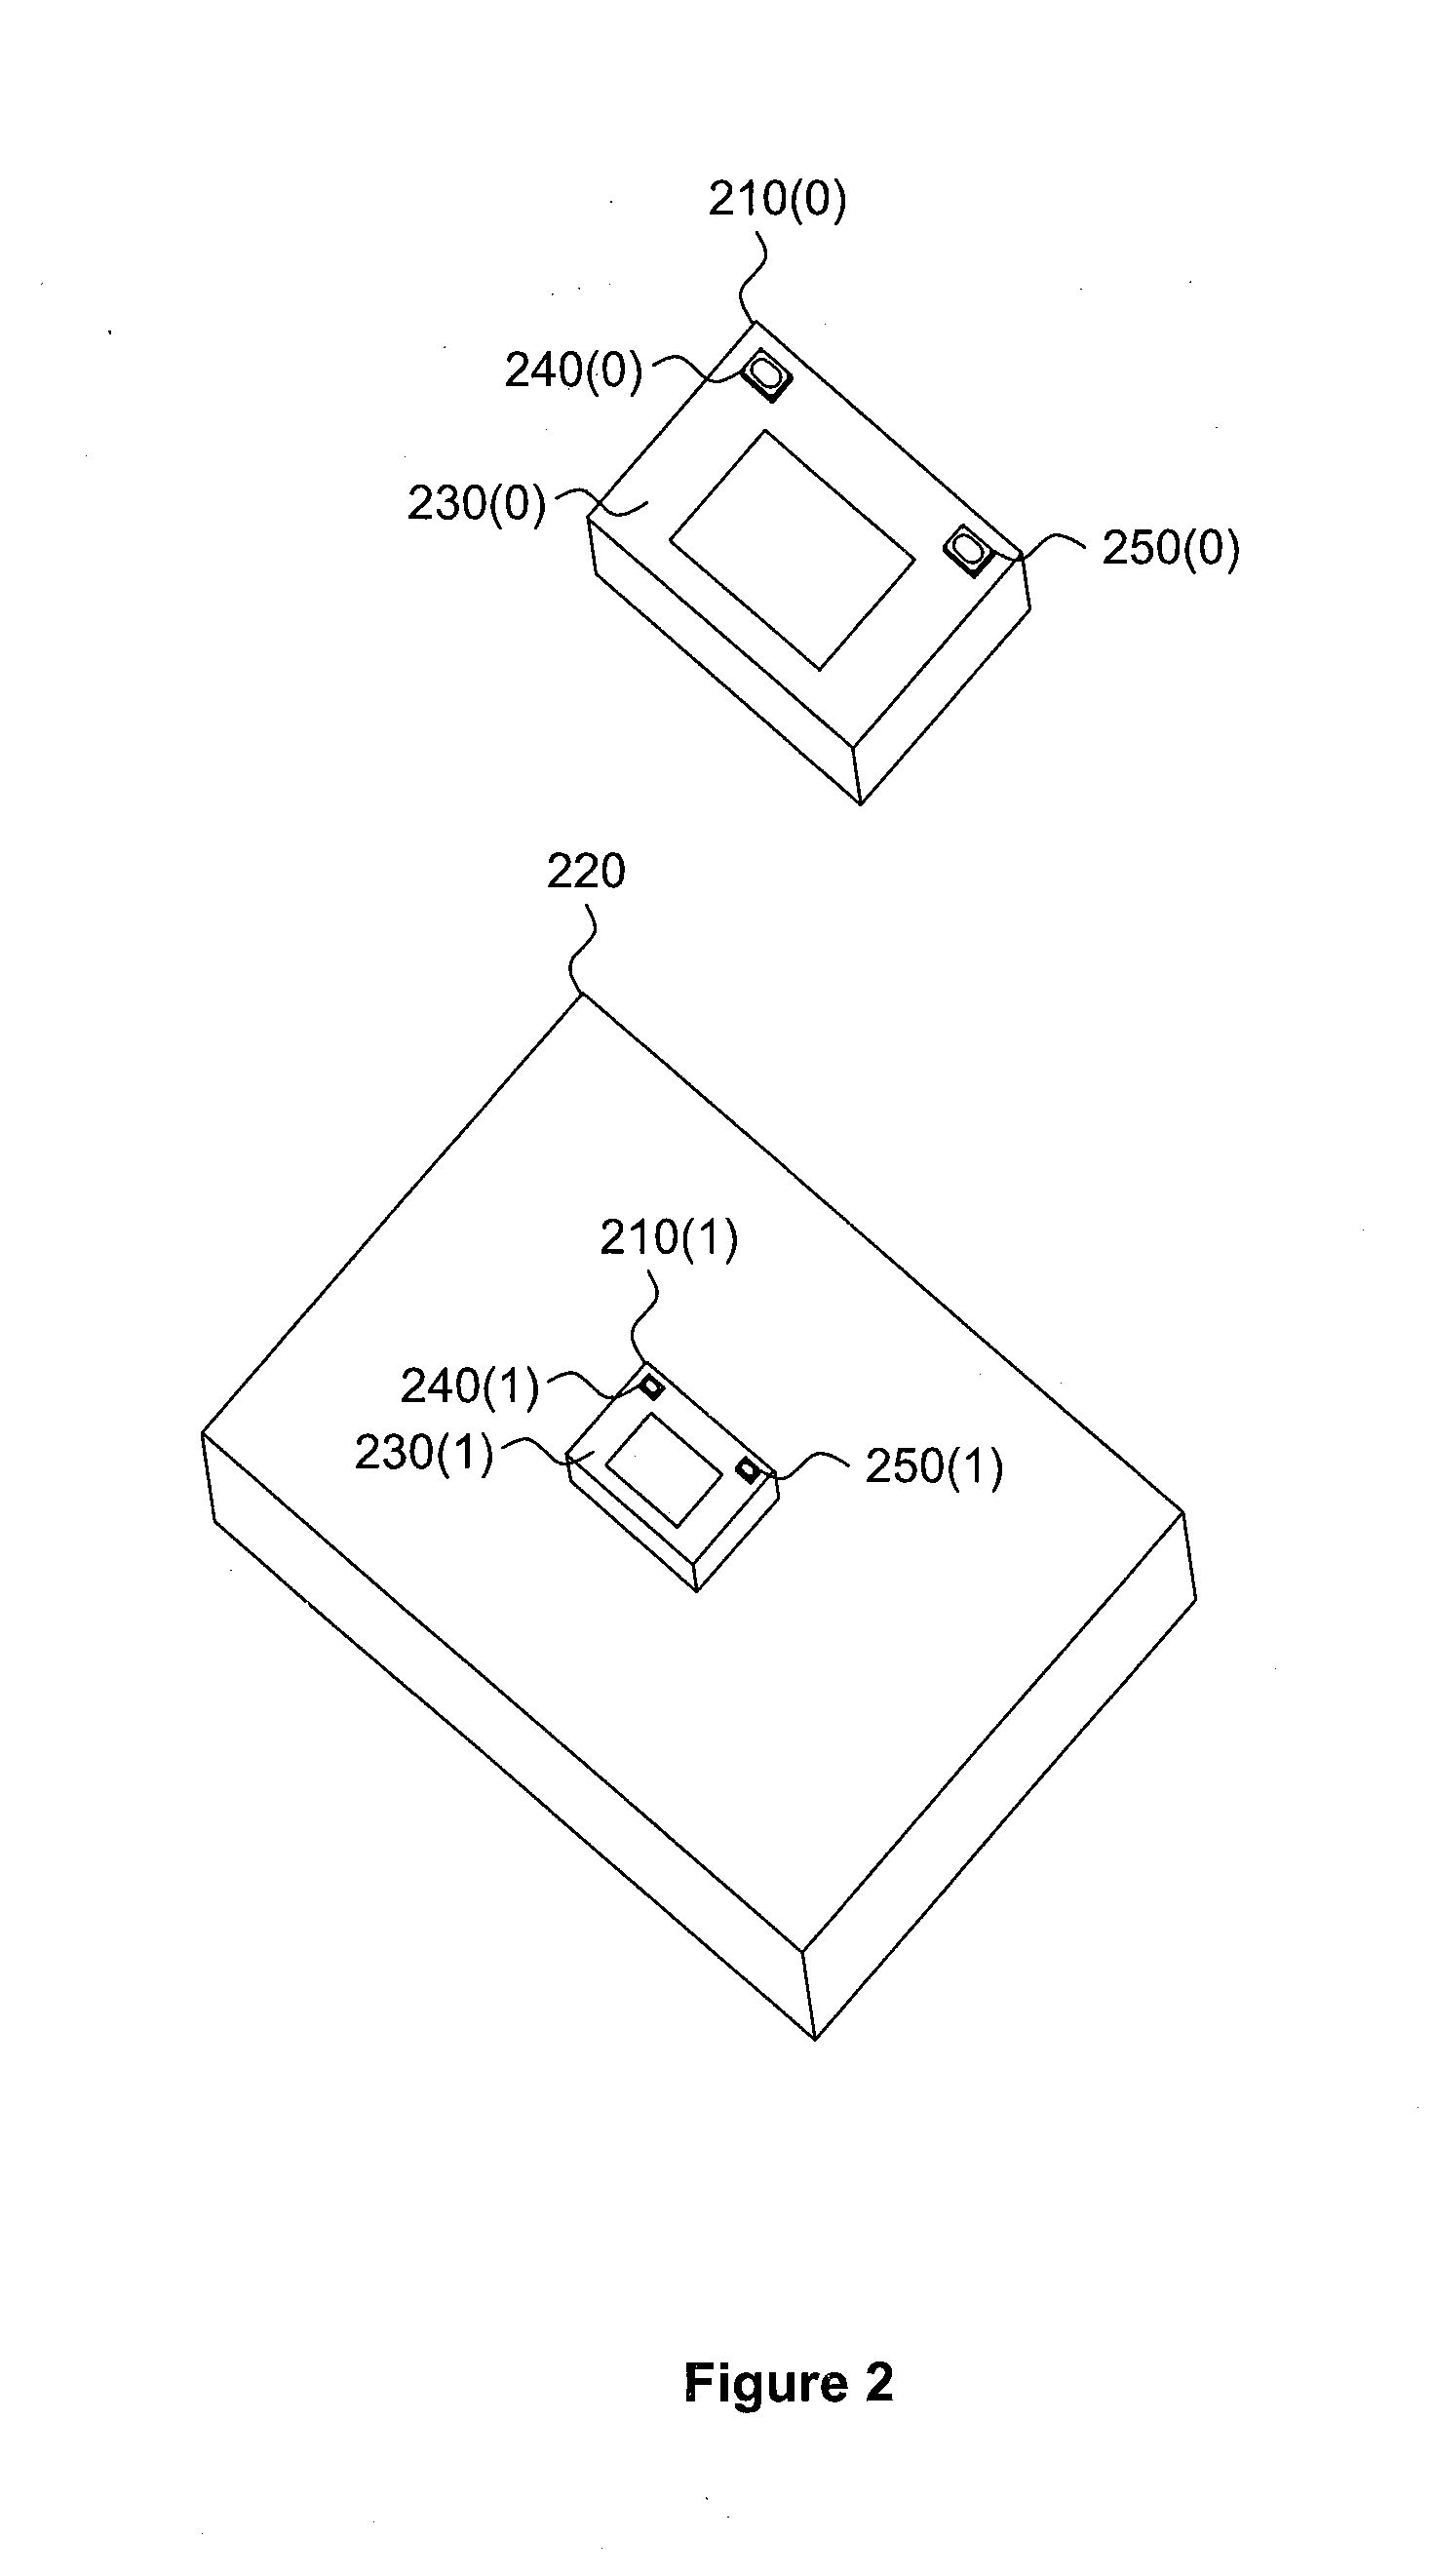 Ported enclosure and automated equalization of frequency response in a micro-speaker audio system